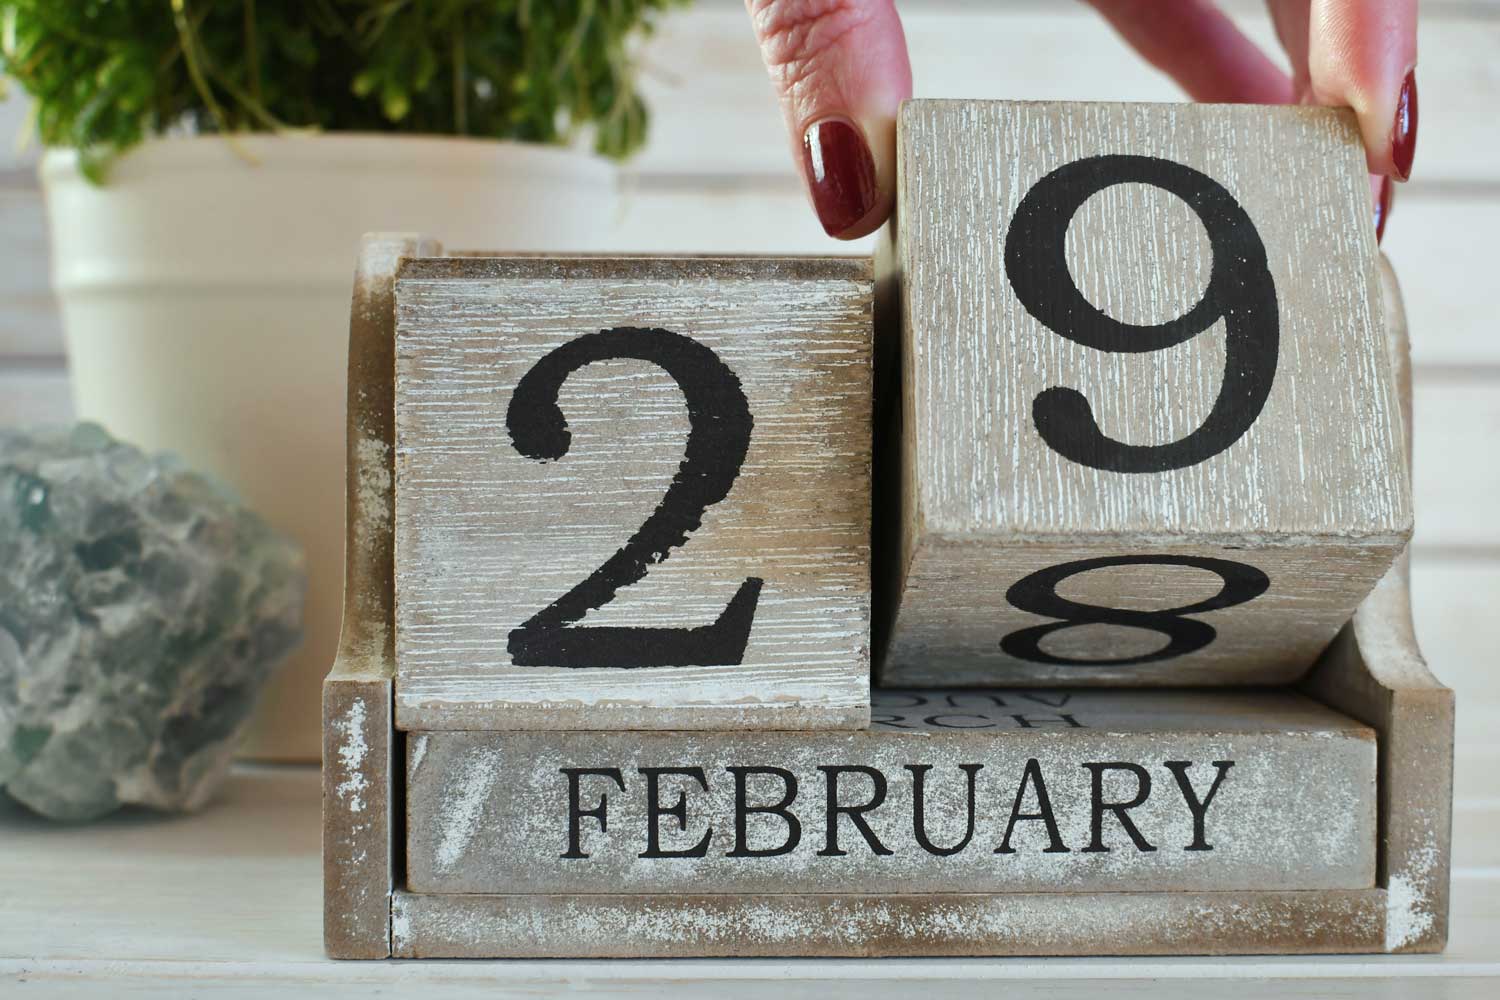 A block calendar showing the date changing to Feb. 29